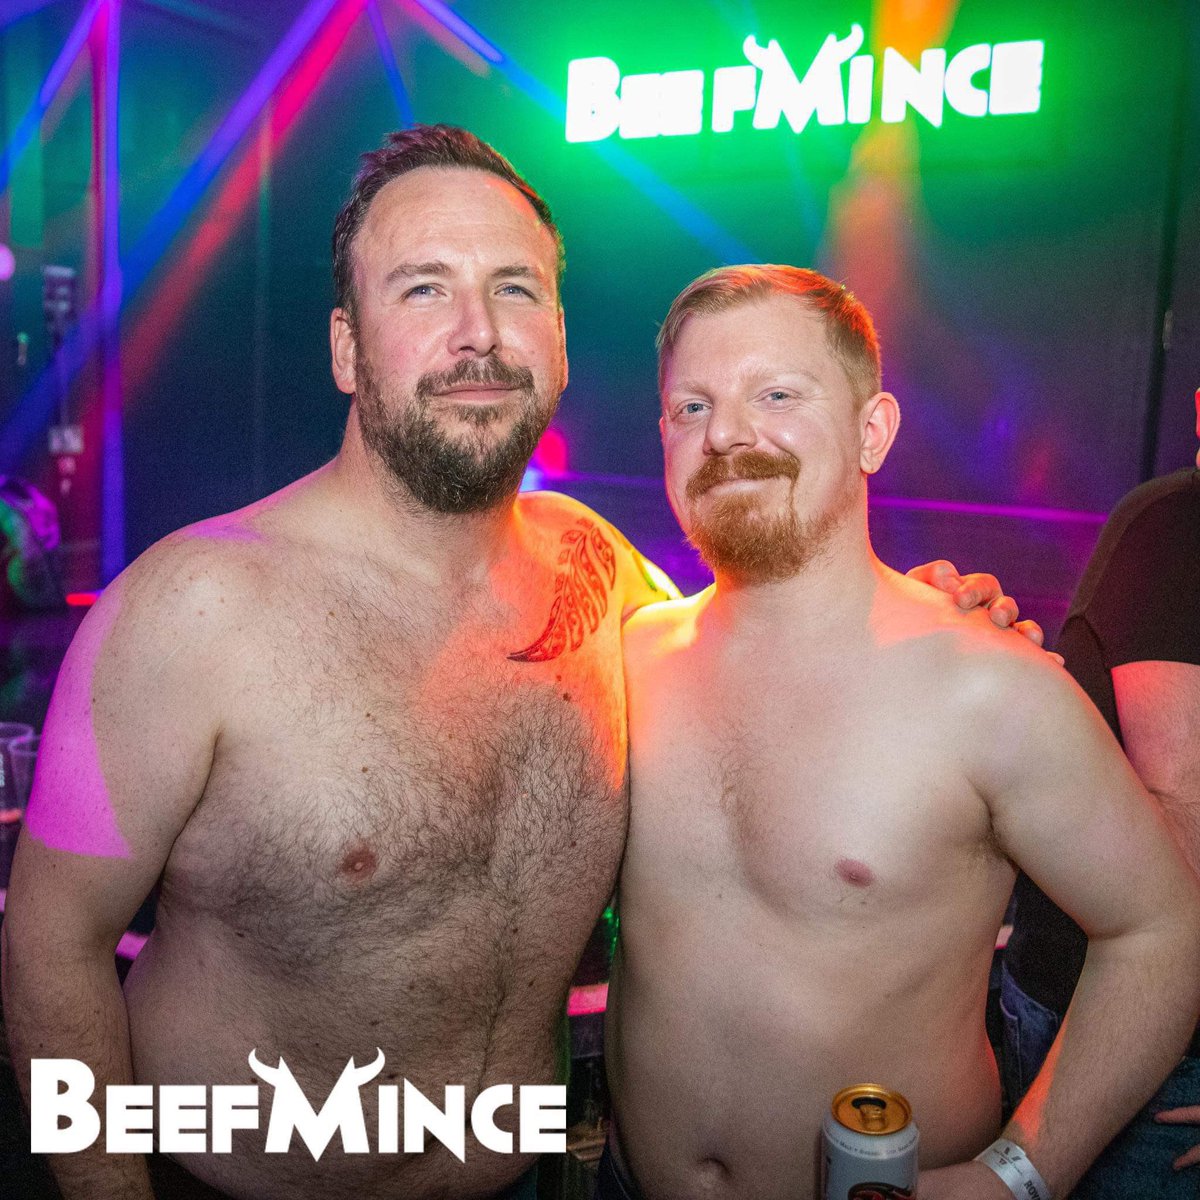 Love this pic! 🐻 @BEEFMINCE